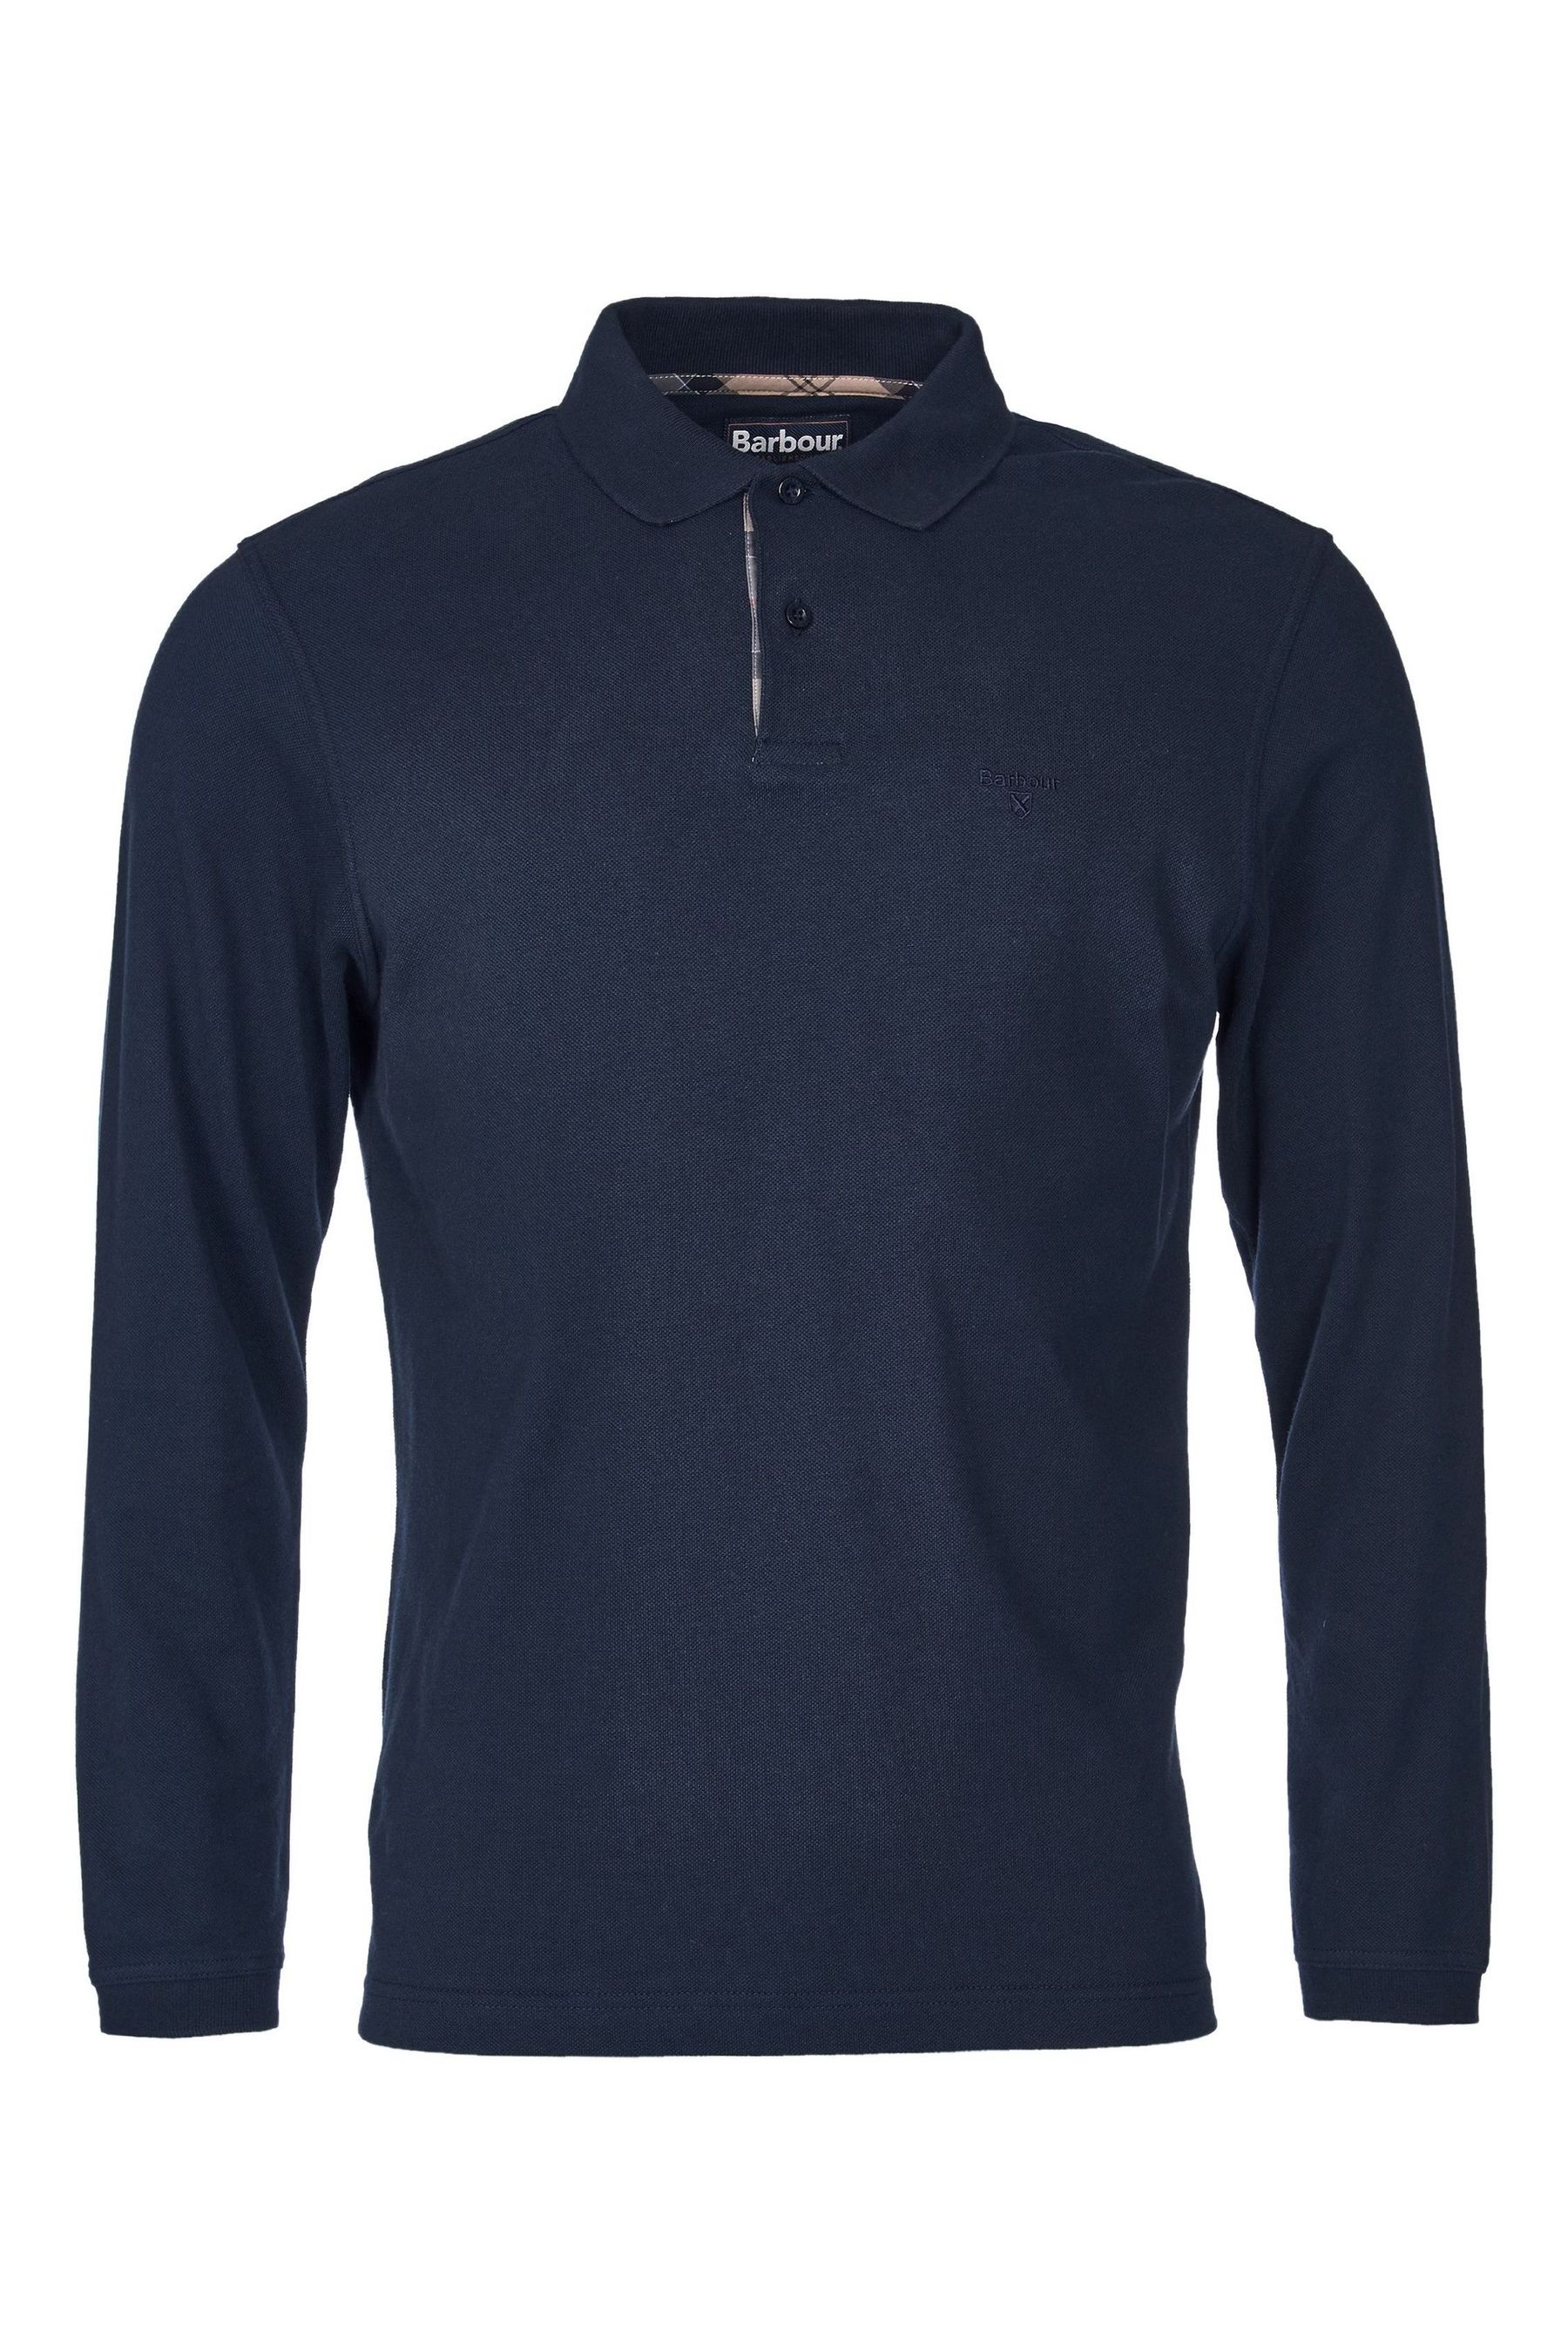 Buy Barbour® Navy Essential Long Sleeve Sports Polo Shirt from the Next ...